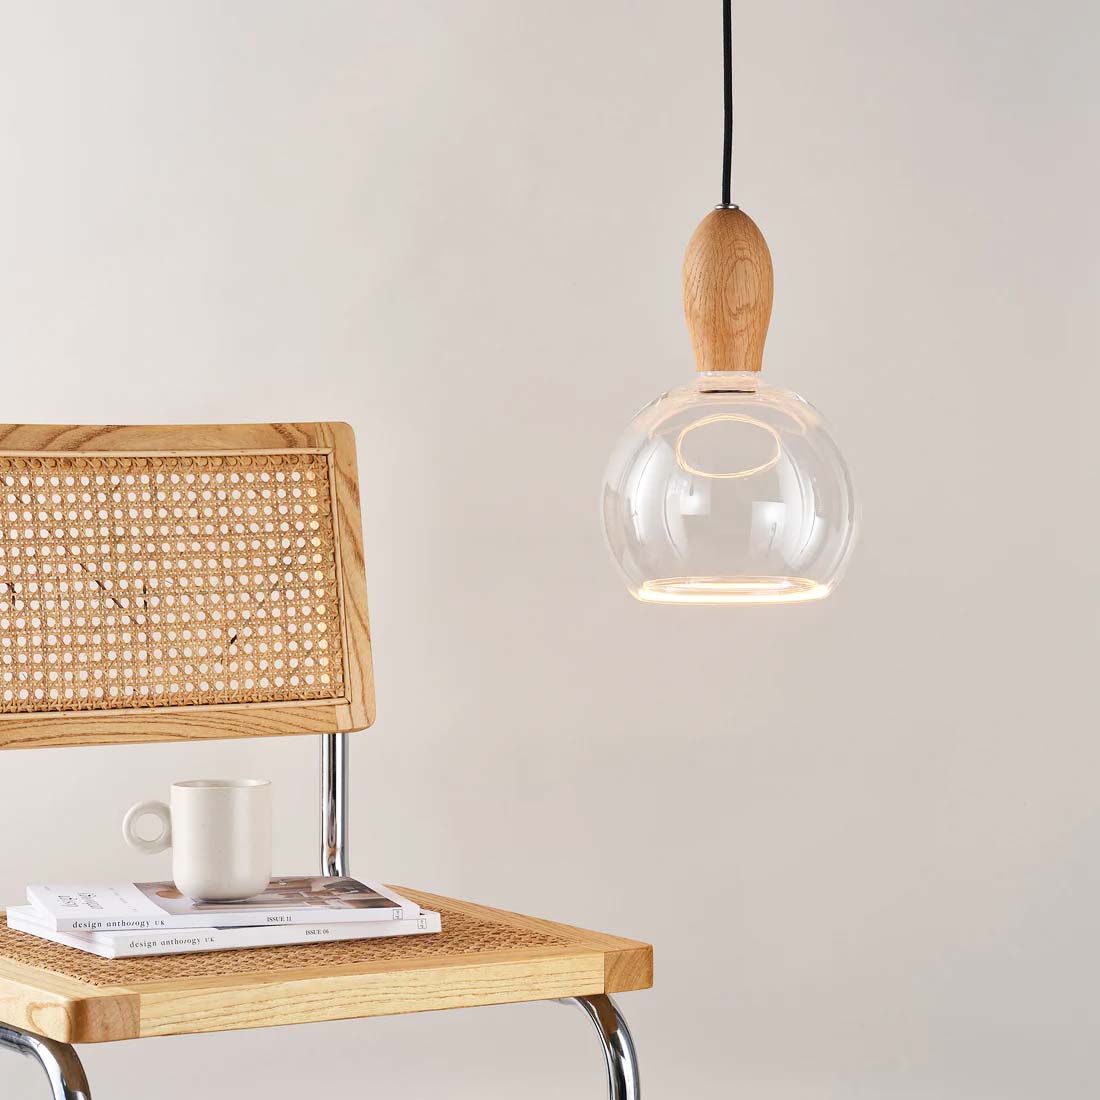 The Woody is a single wooden pendant light, shown here made from oak and supplied by South Charlotte Fine Lighting